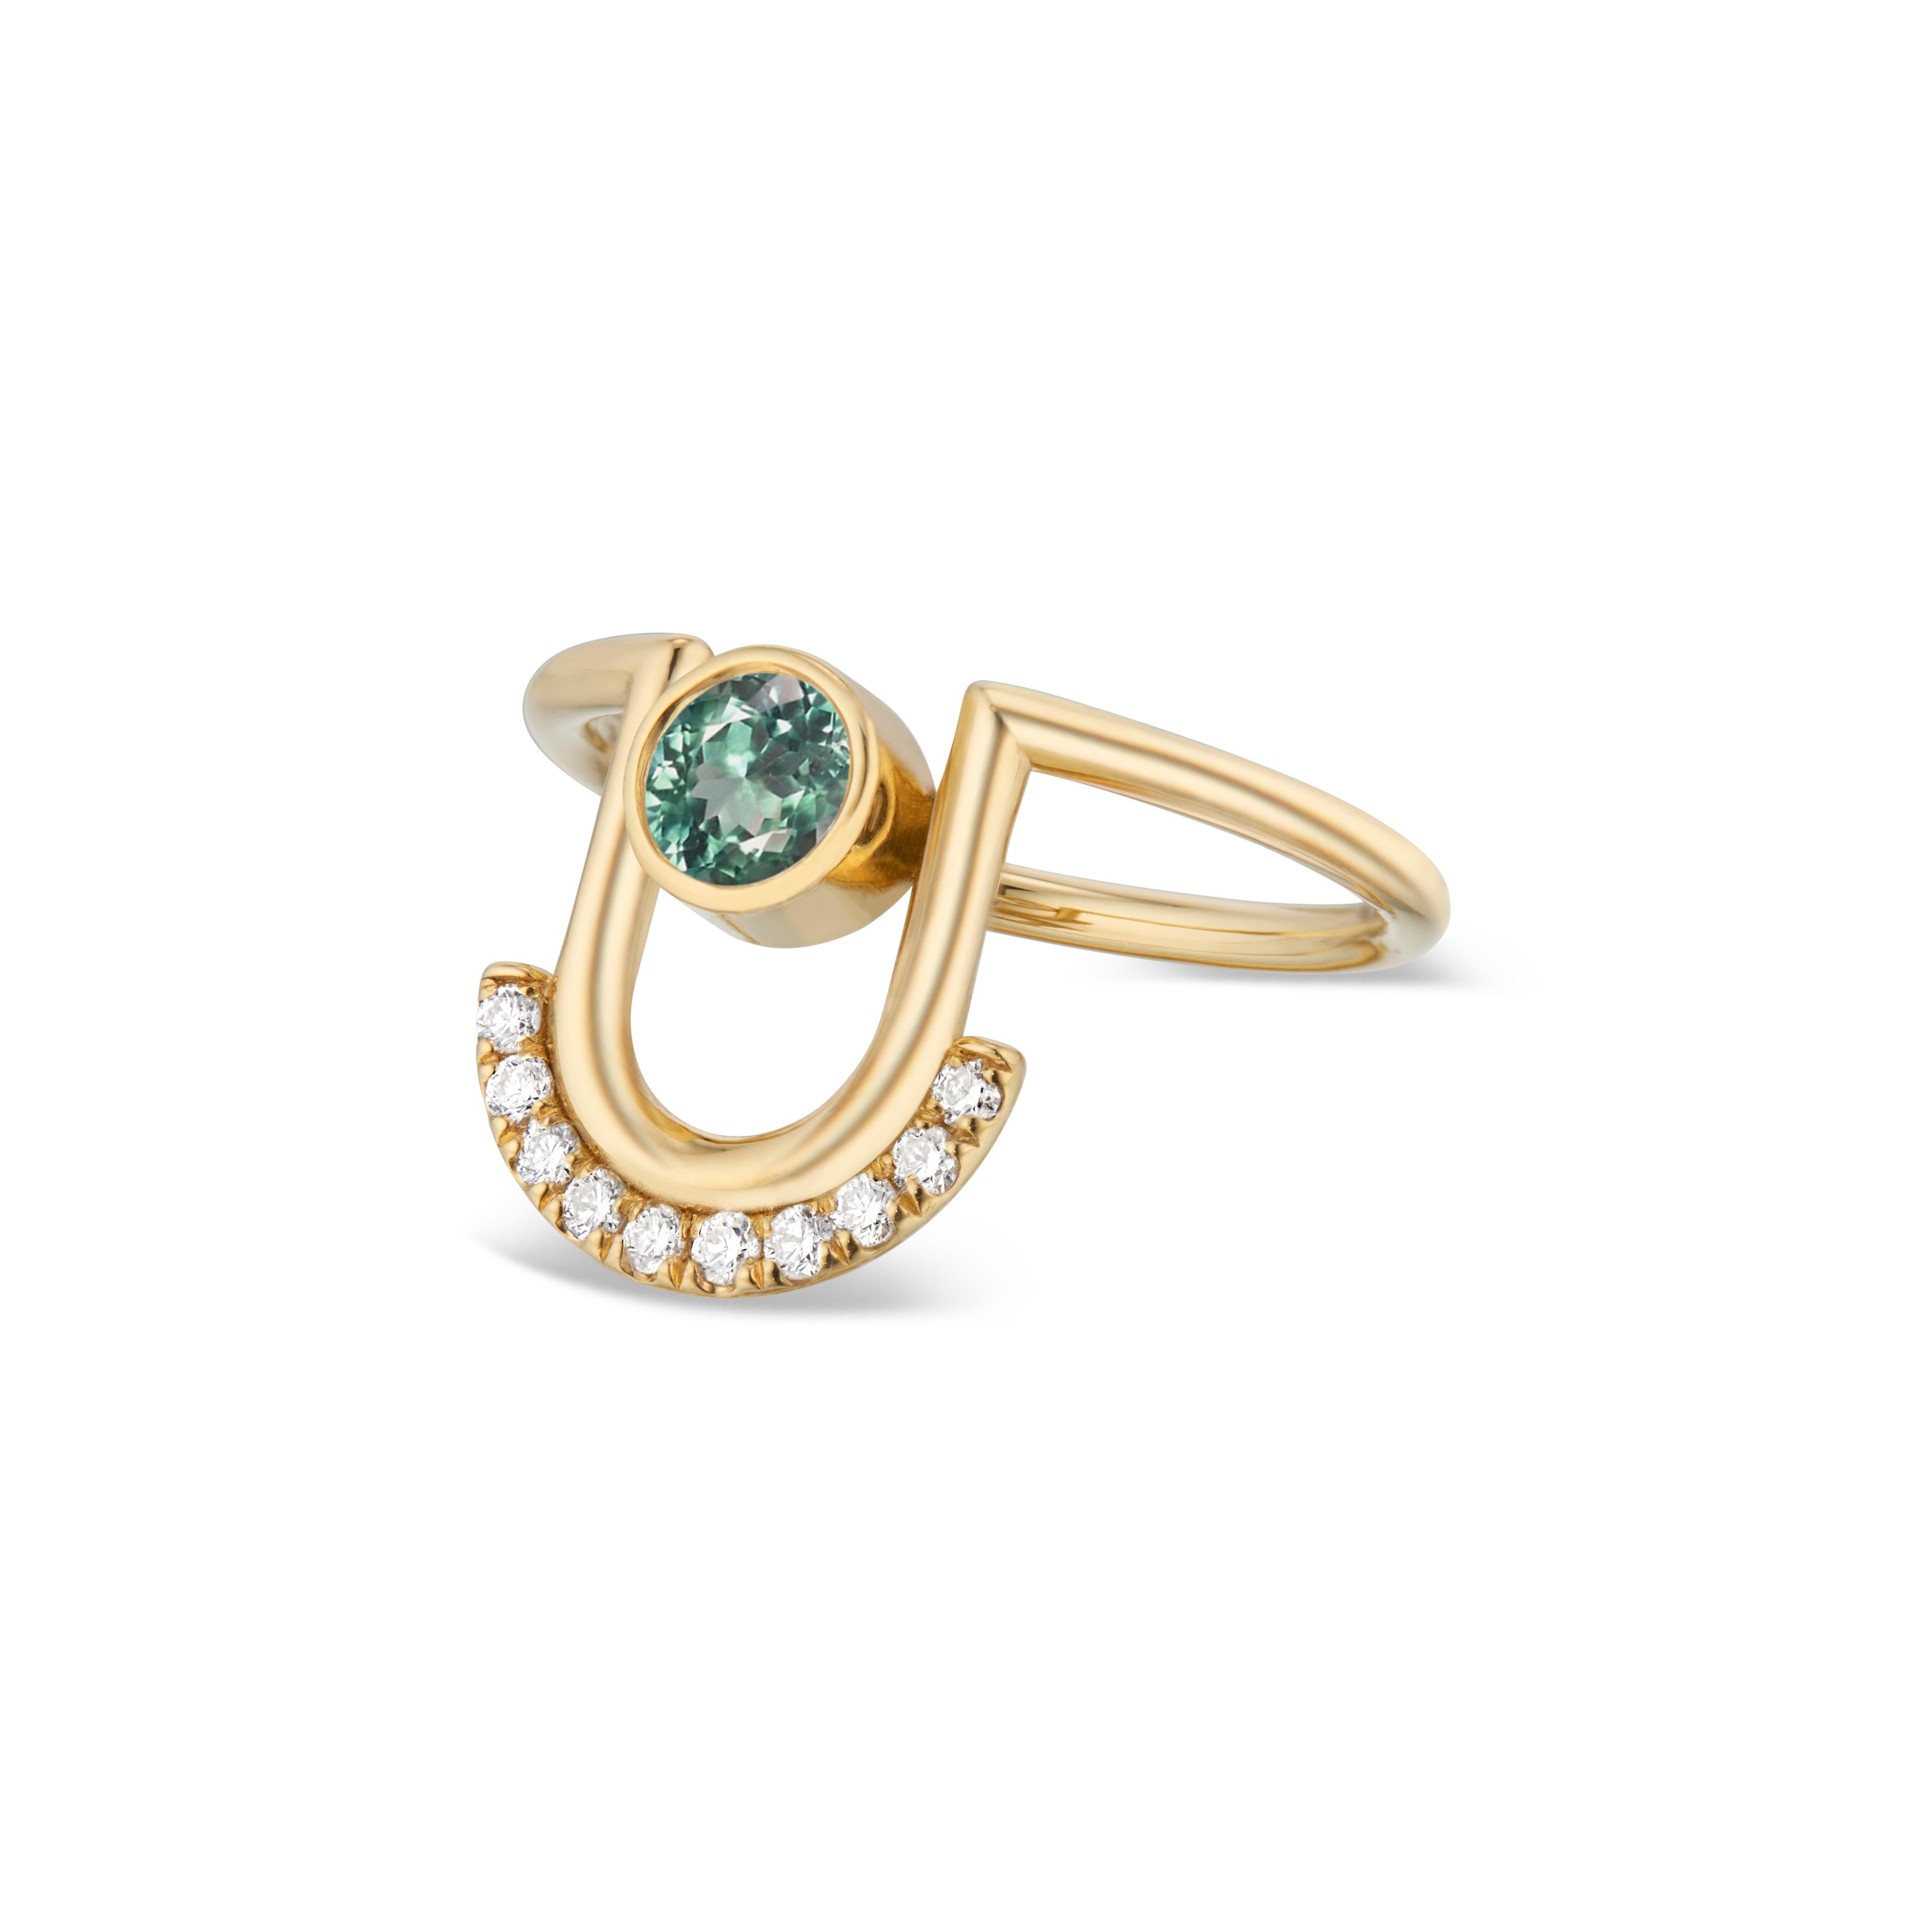 Contemporary Casey Perez 14K Gold Modern Arc Ring with Banded Detail with Green Tourmaline For Sale